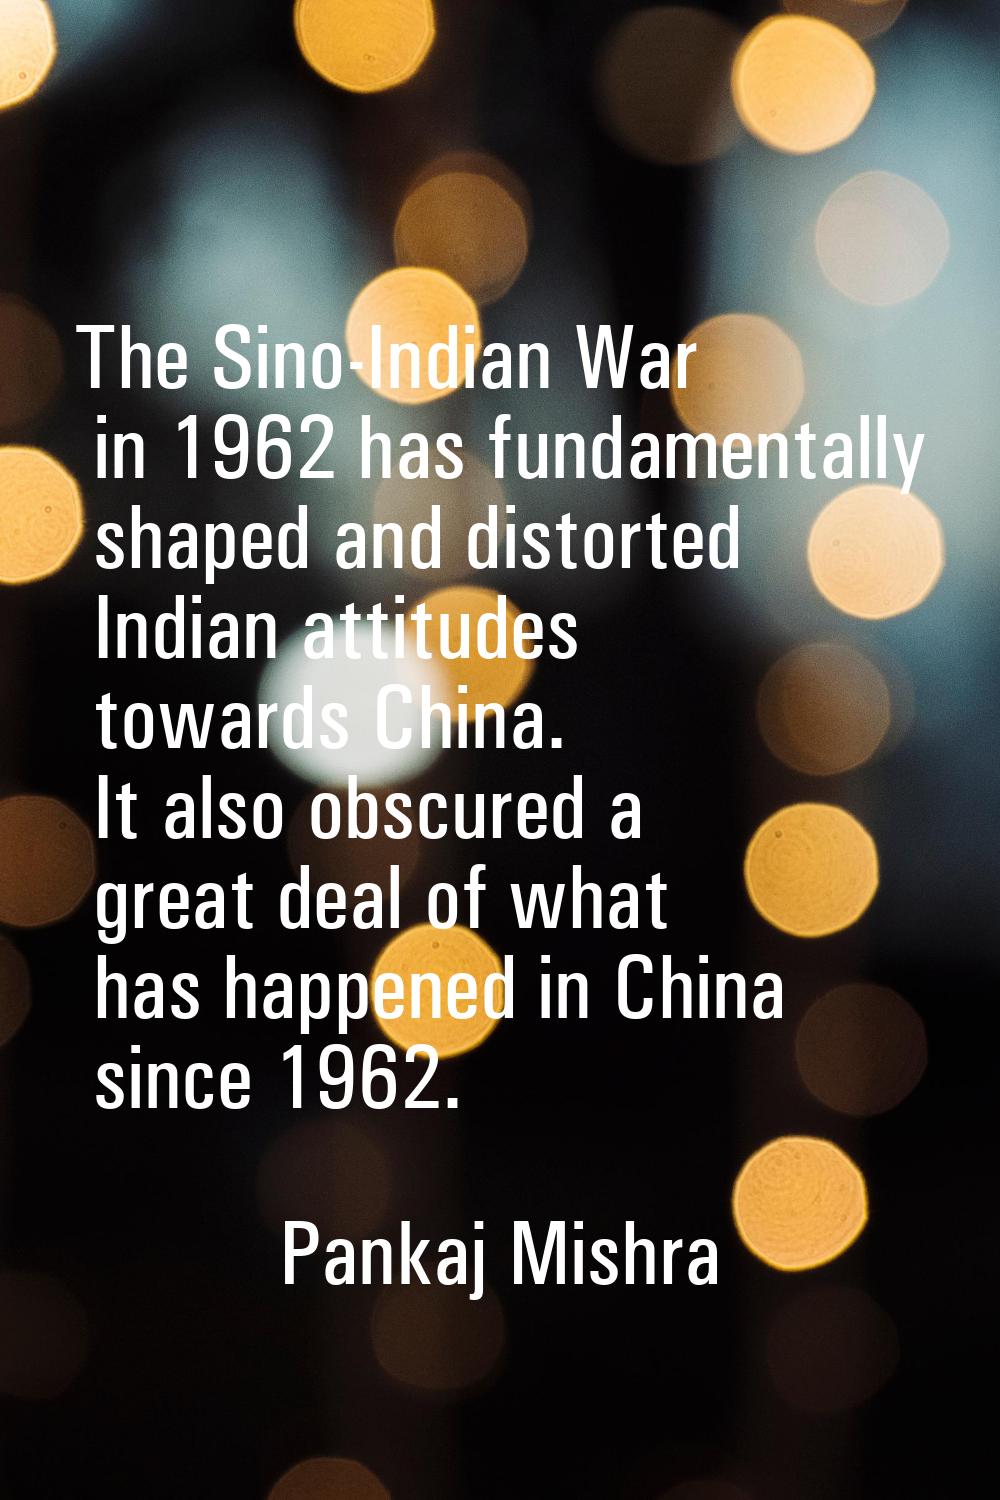 The Sino-Indian War in 1962 has fundamentally shaped and distorted Indian attitudes towards China. 